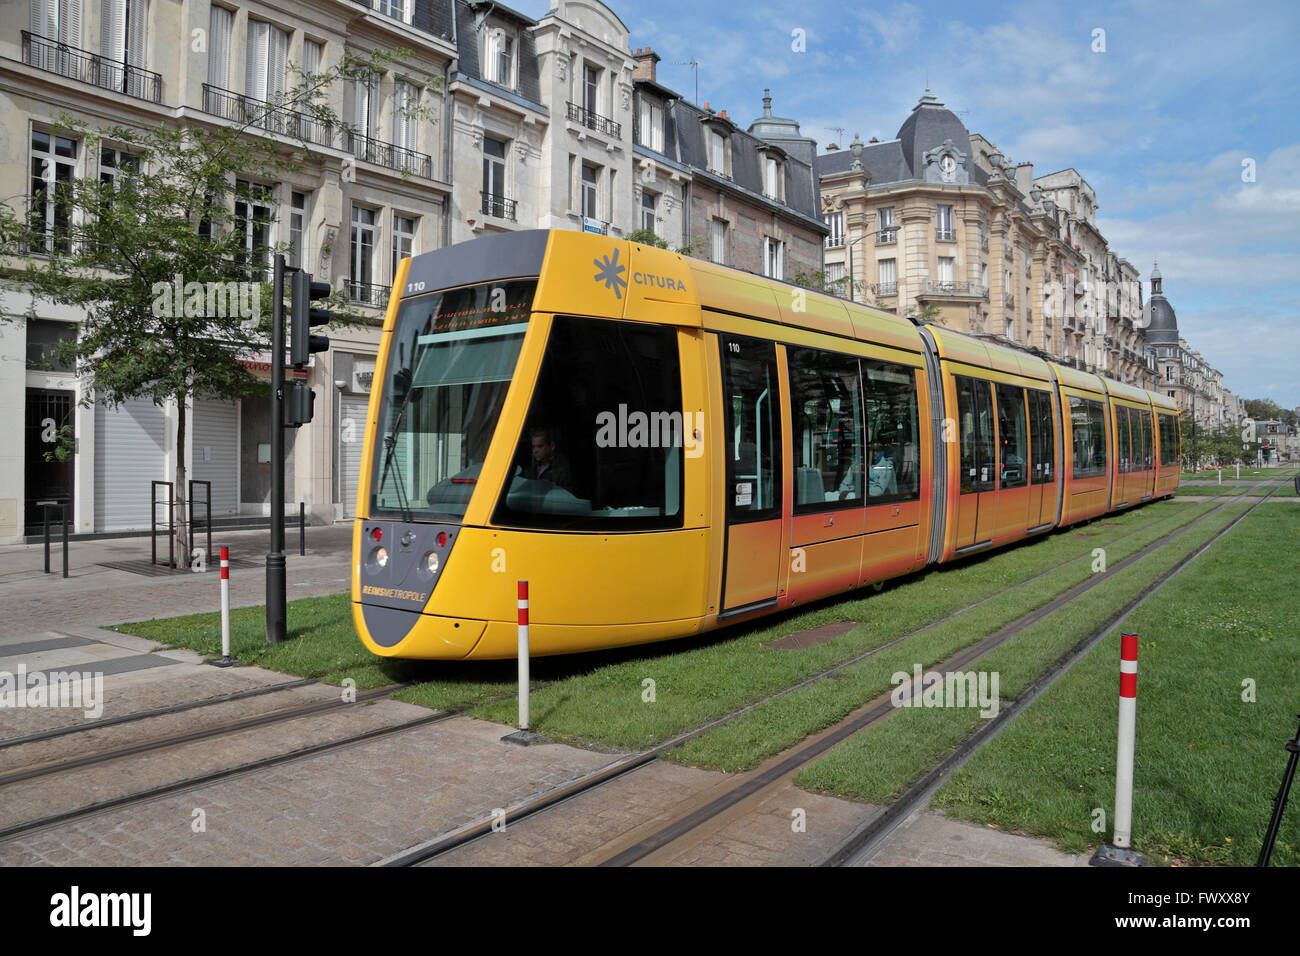 A Reims city tram (operated by Citura) in Riems, Champagne-Ardenne, France. Stock Photo